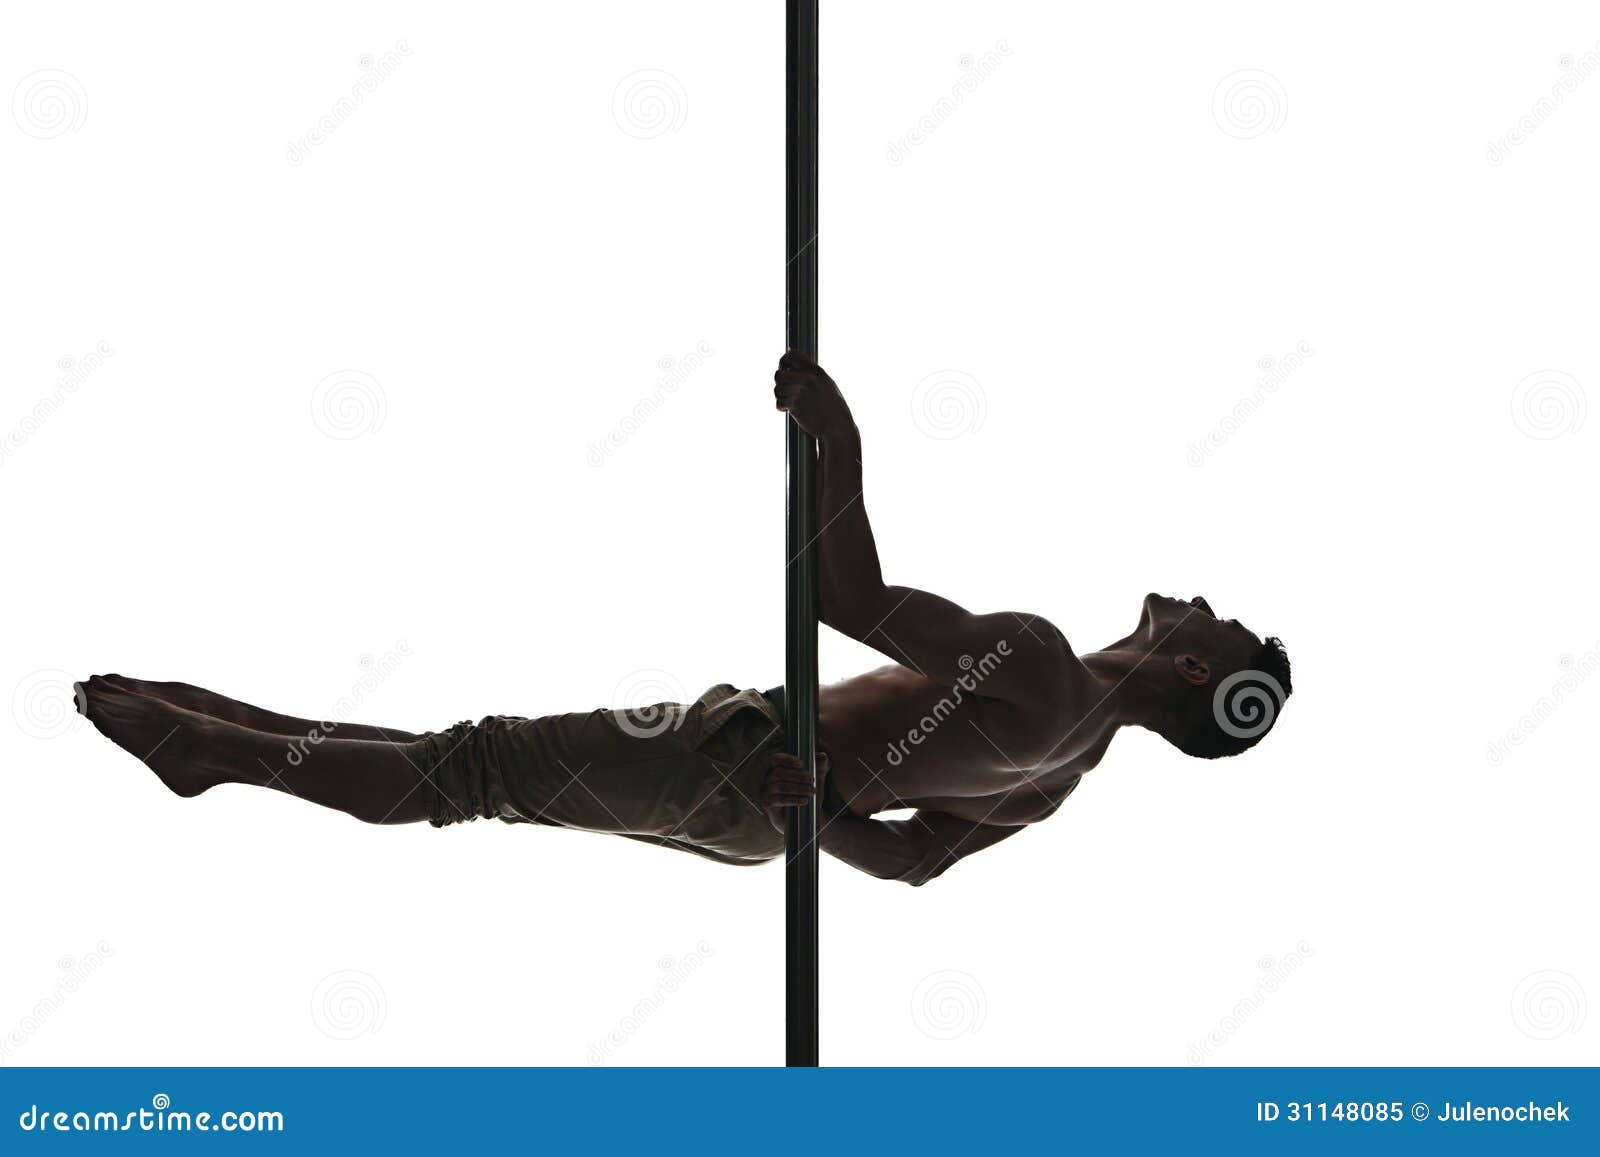 Young Strong Pole Dance Man Stock Image - Image of entertainment